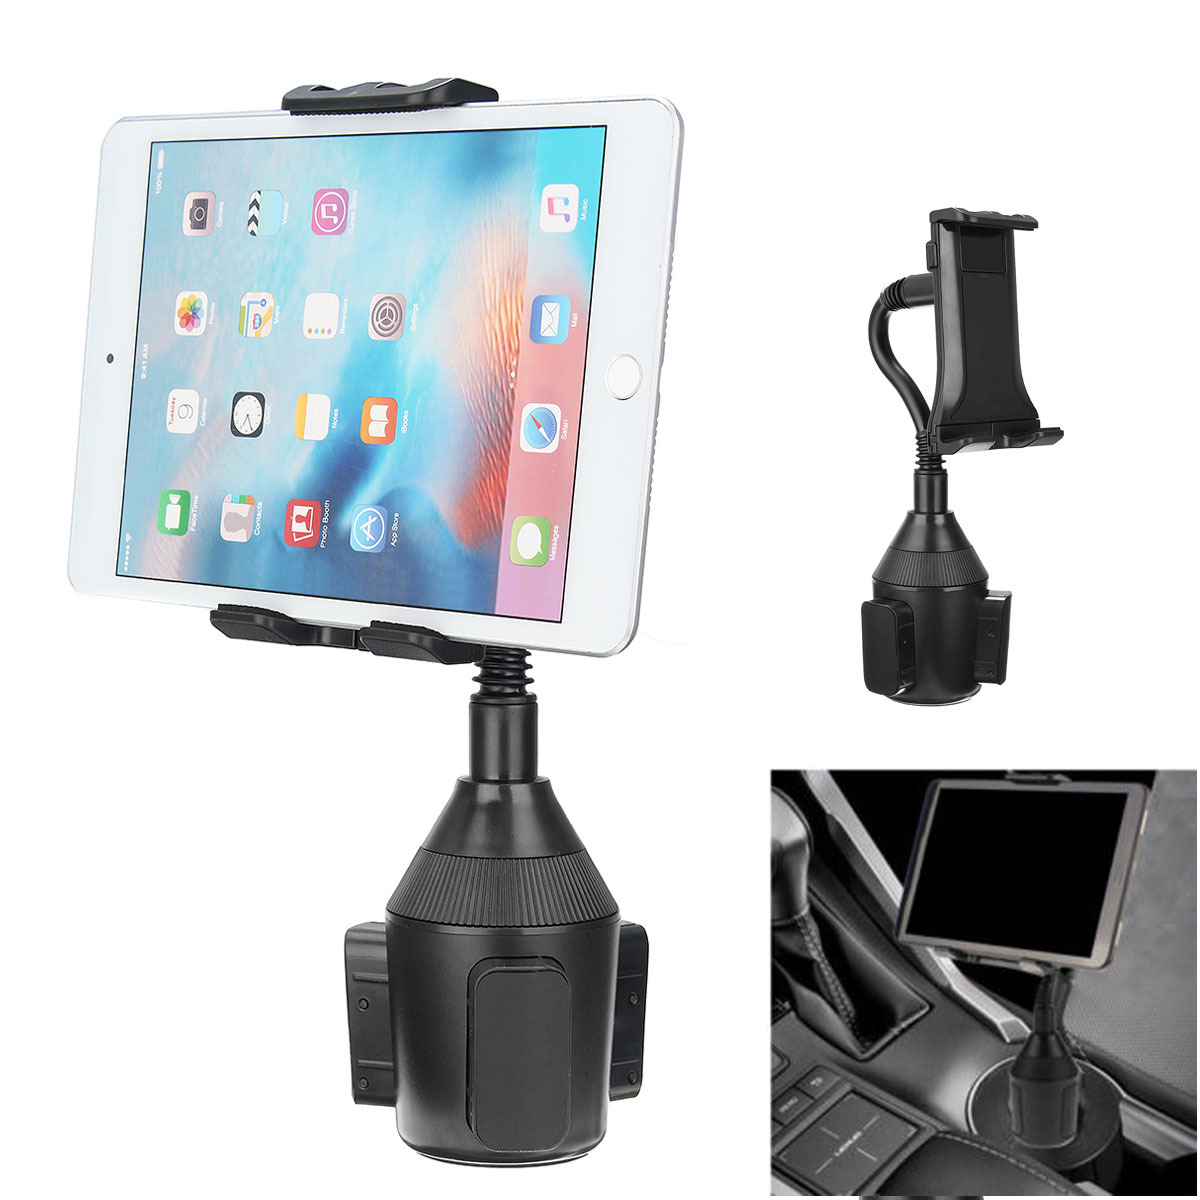 

Universal Car Cup Holder Mount Stand Adjustable Cradle For Mobile Phone Tablet PC